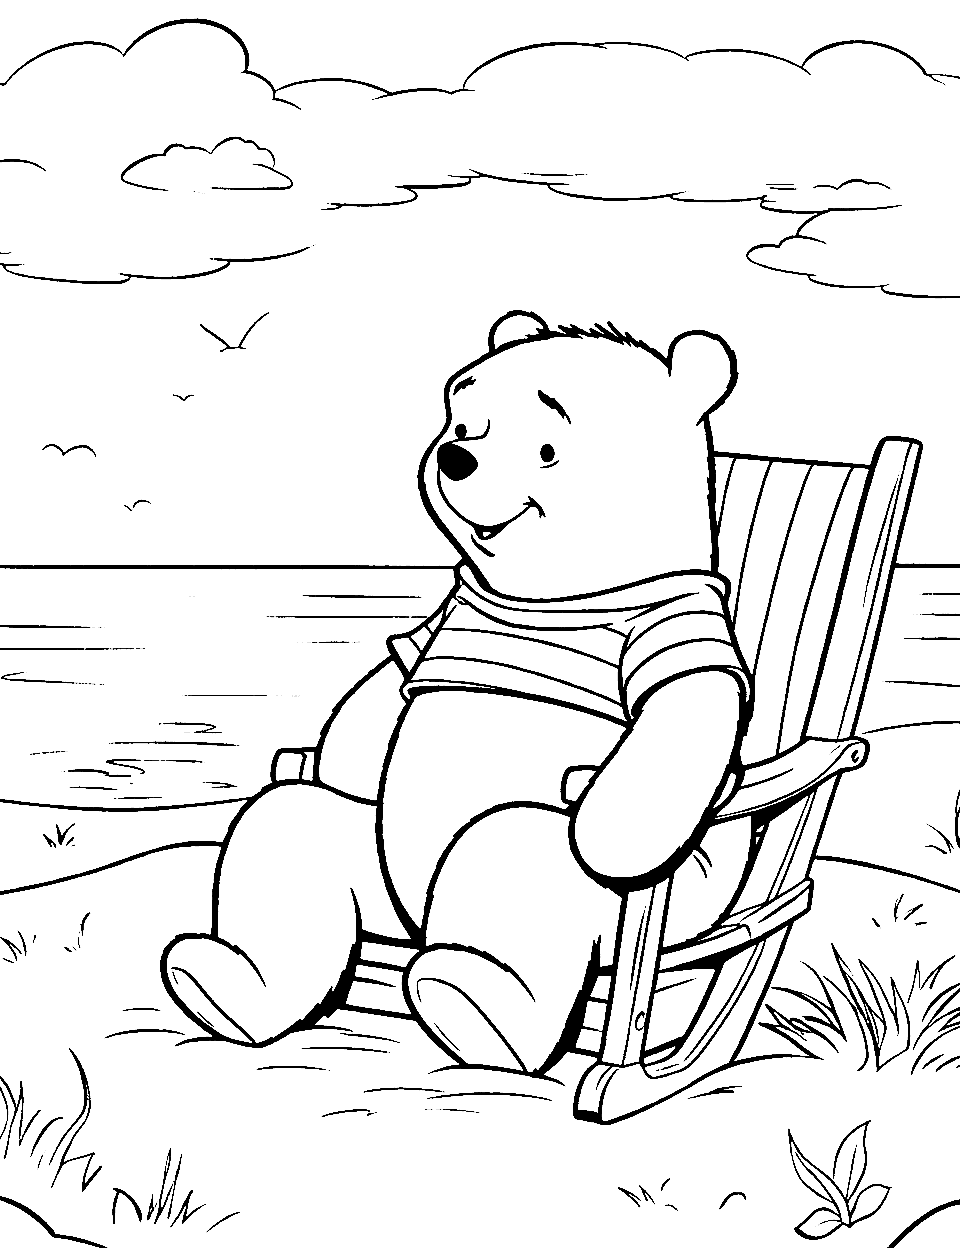 Relaxing Beach Day Coloring Page - Pooh Bear relaxing and enjoying a sunny day at the beach.